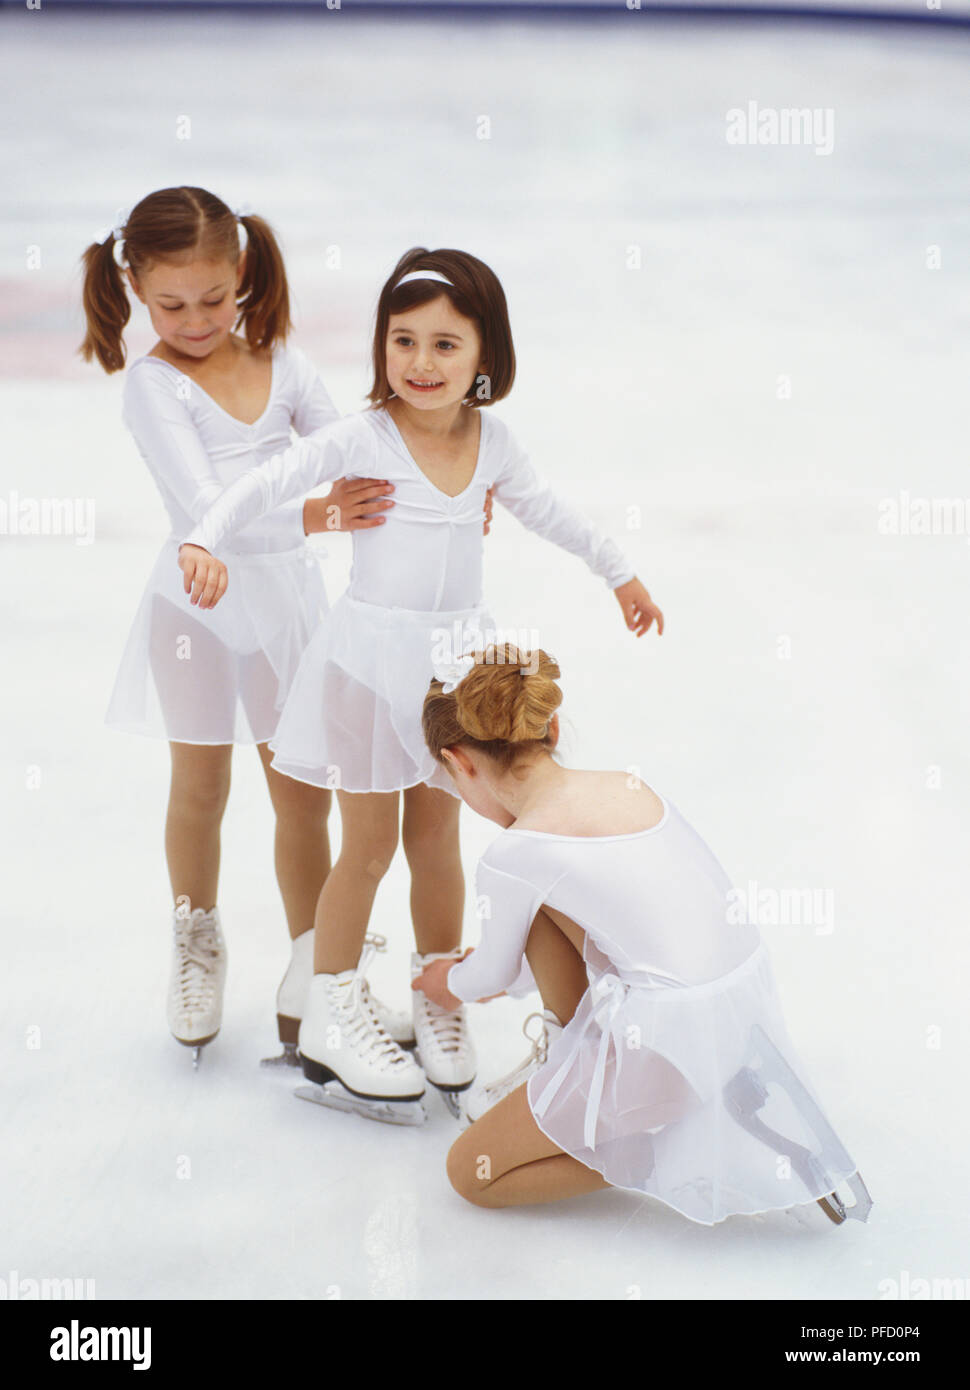 Group of three children in white ice skating costumes, first girl  supporting second one, third girl kneeling on ice and tying laces of second girl's  shoes Stock Photo - Alamy